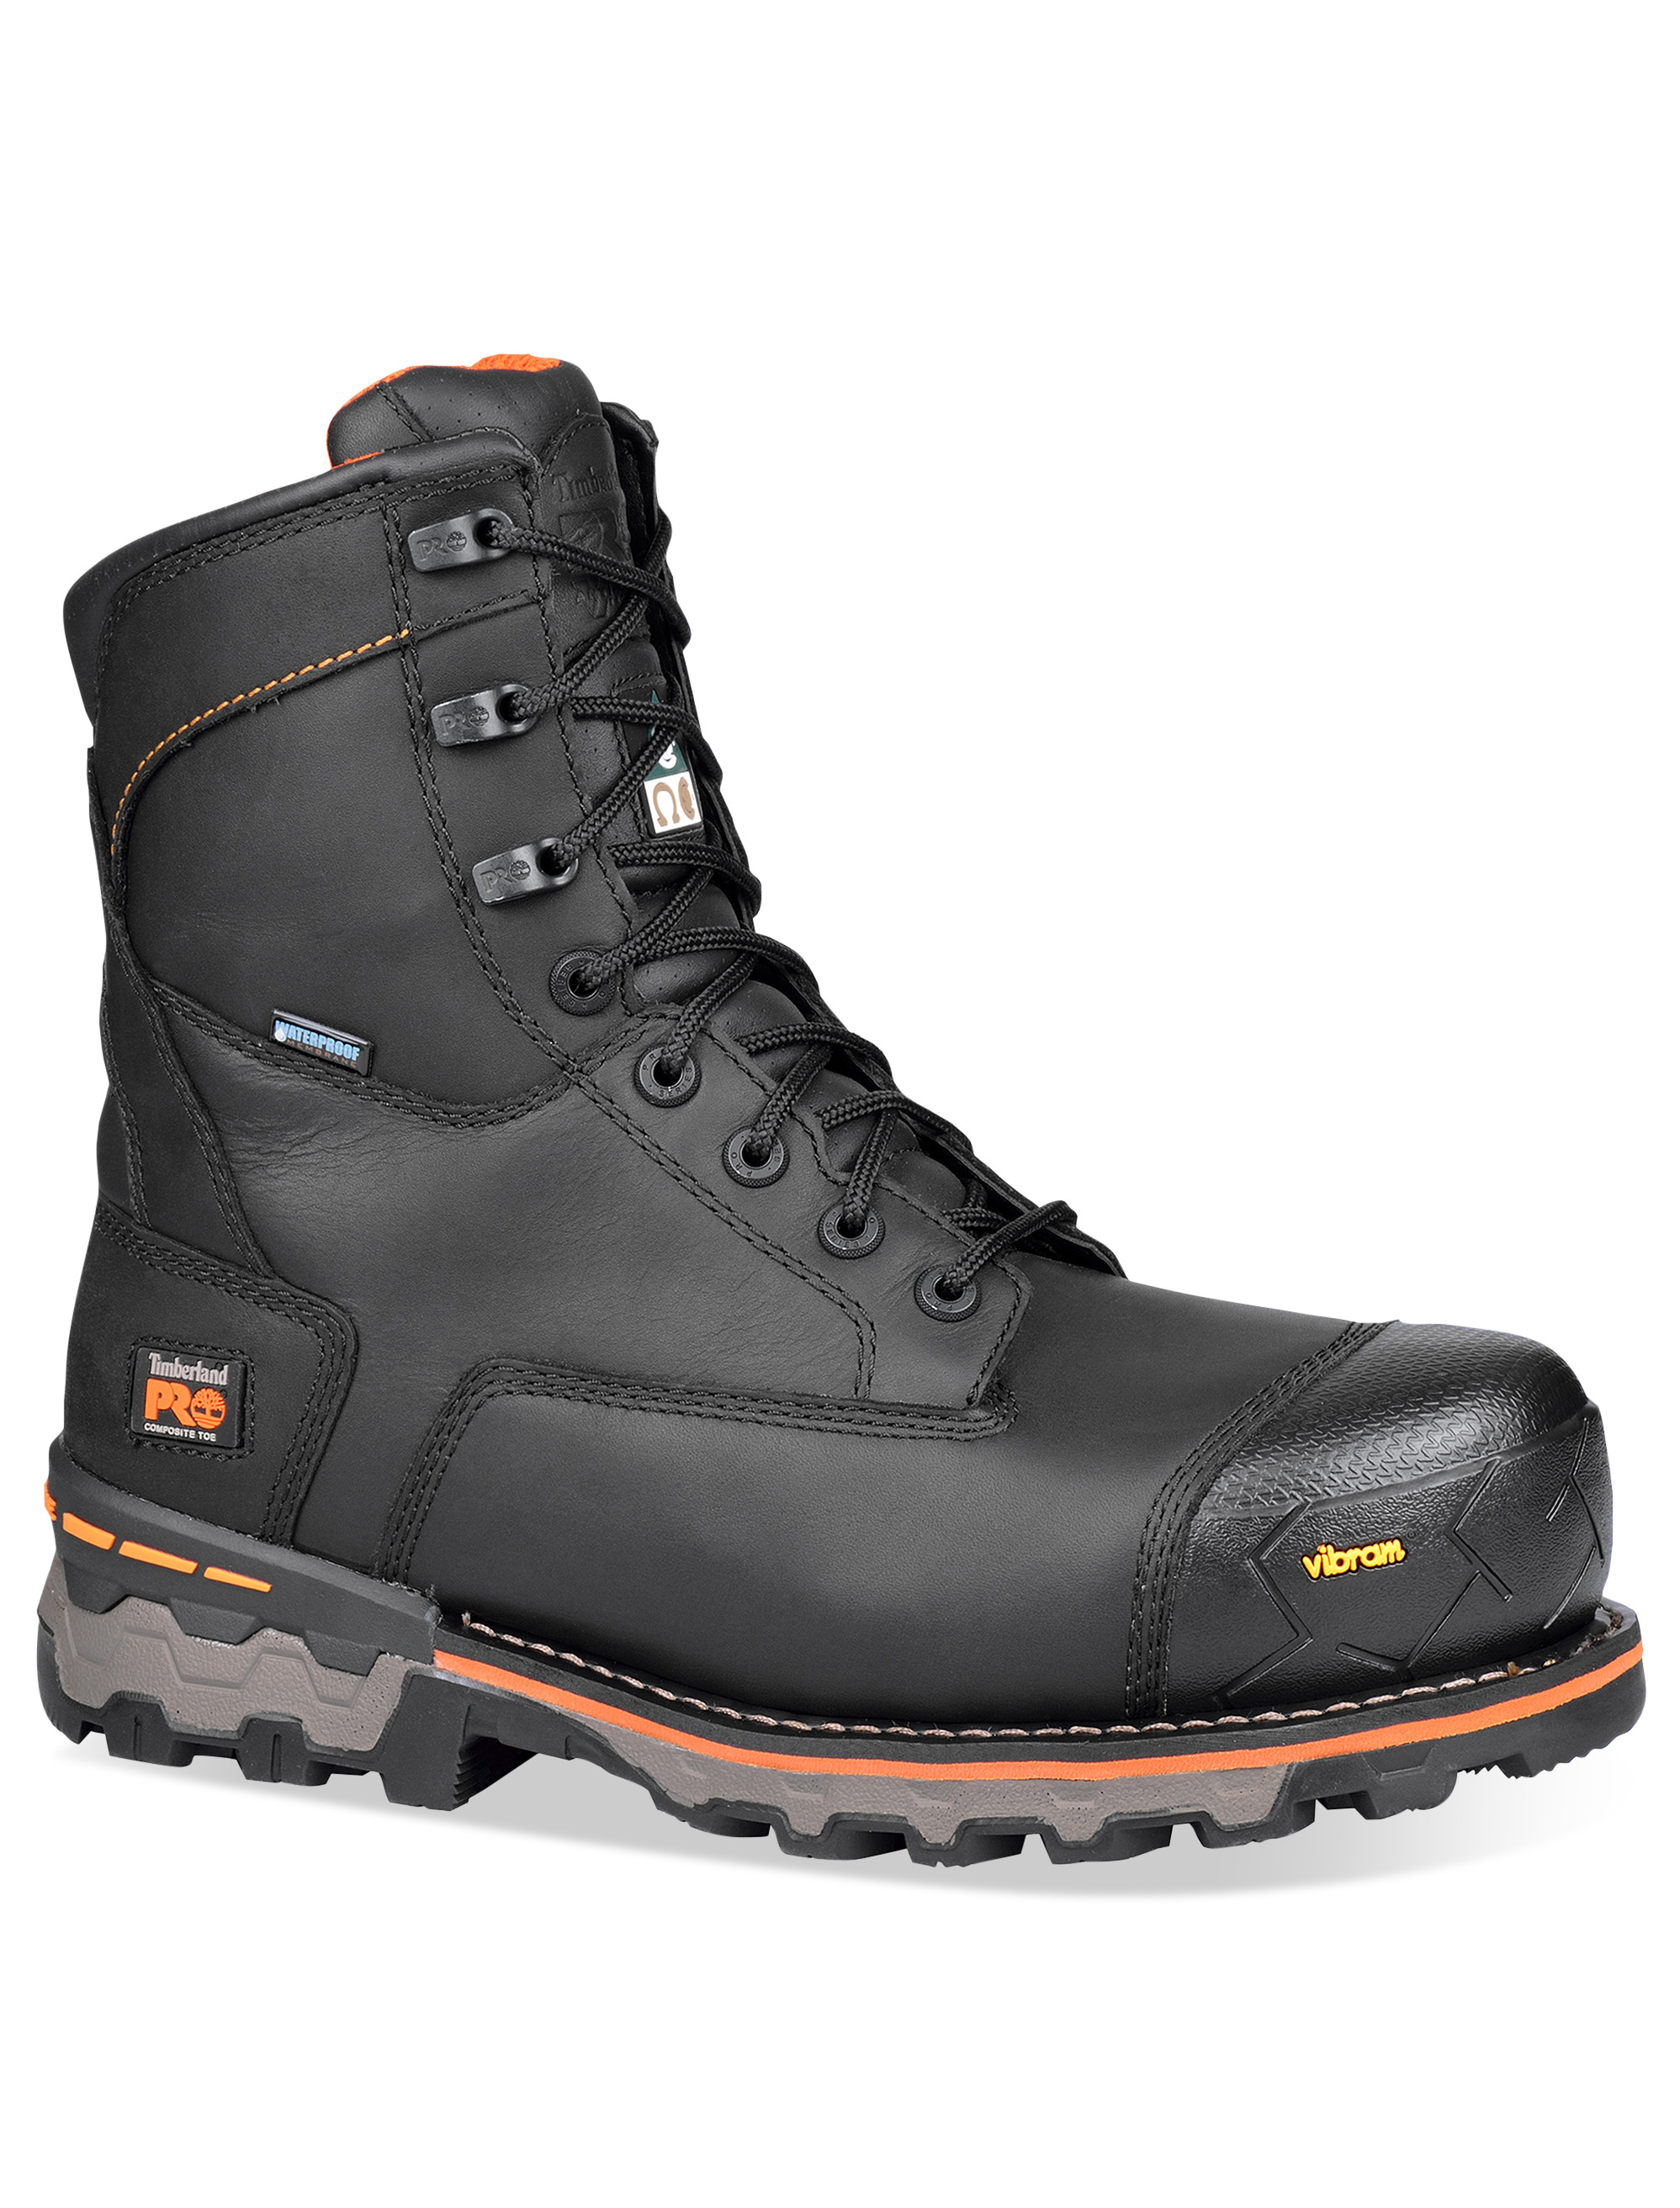 Boondock 8" Safety Toe Work Boots